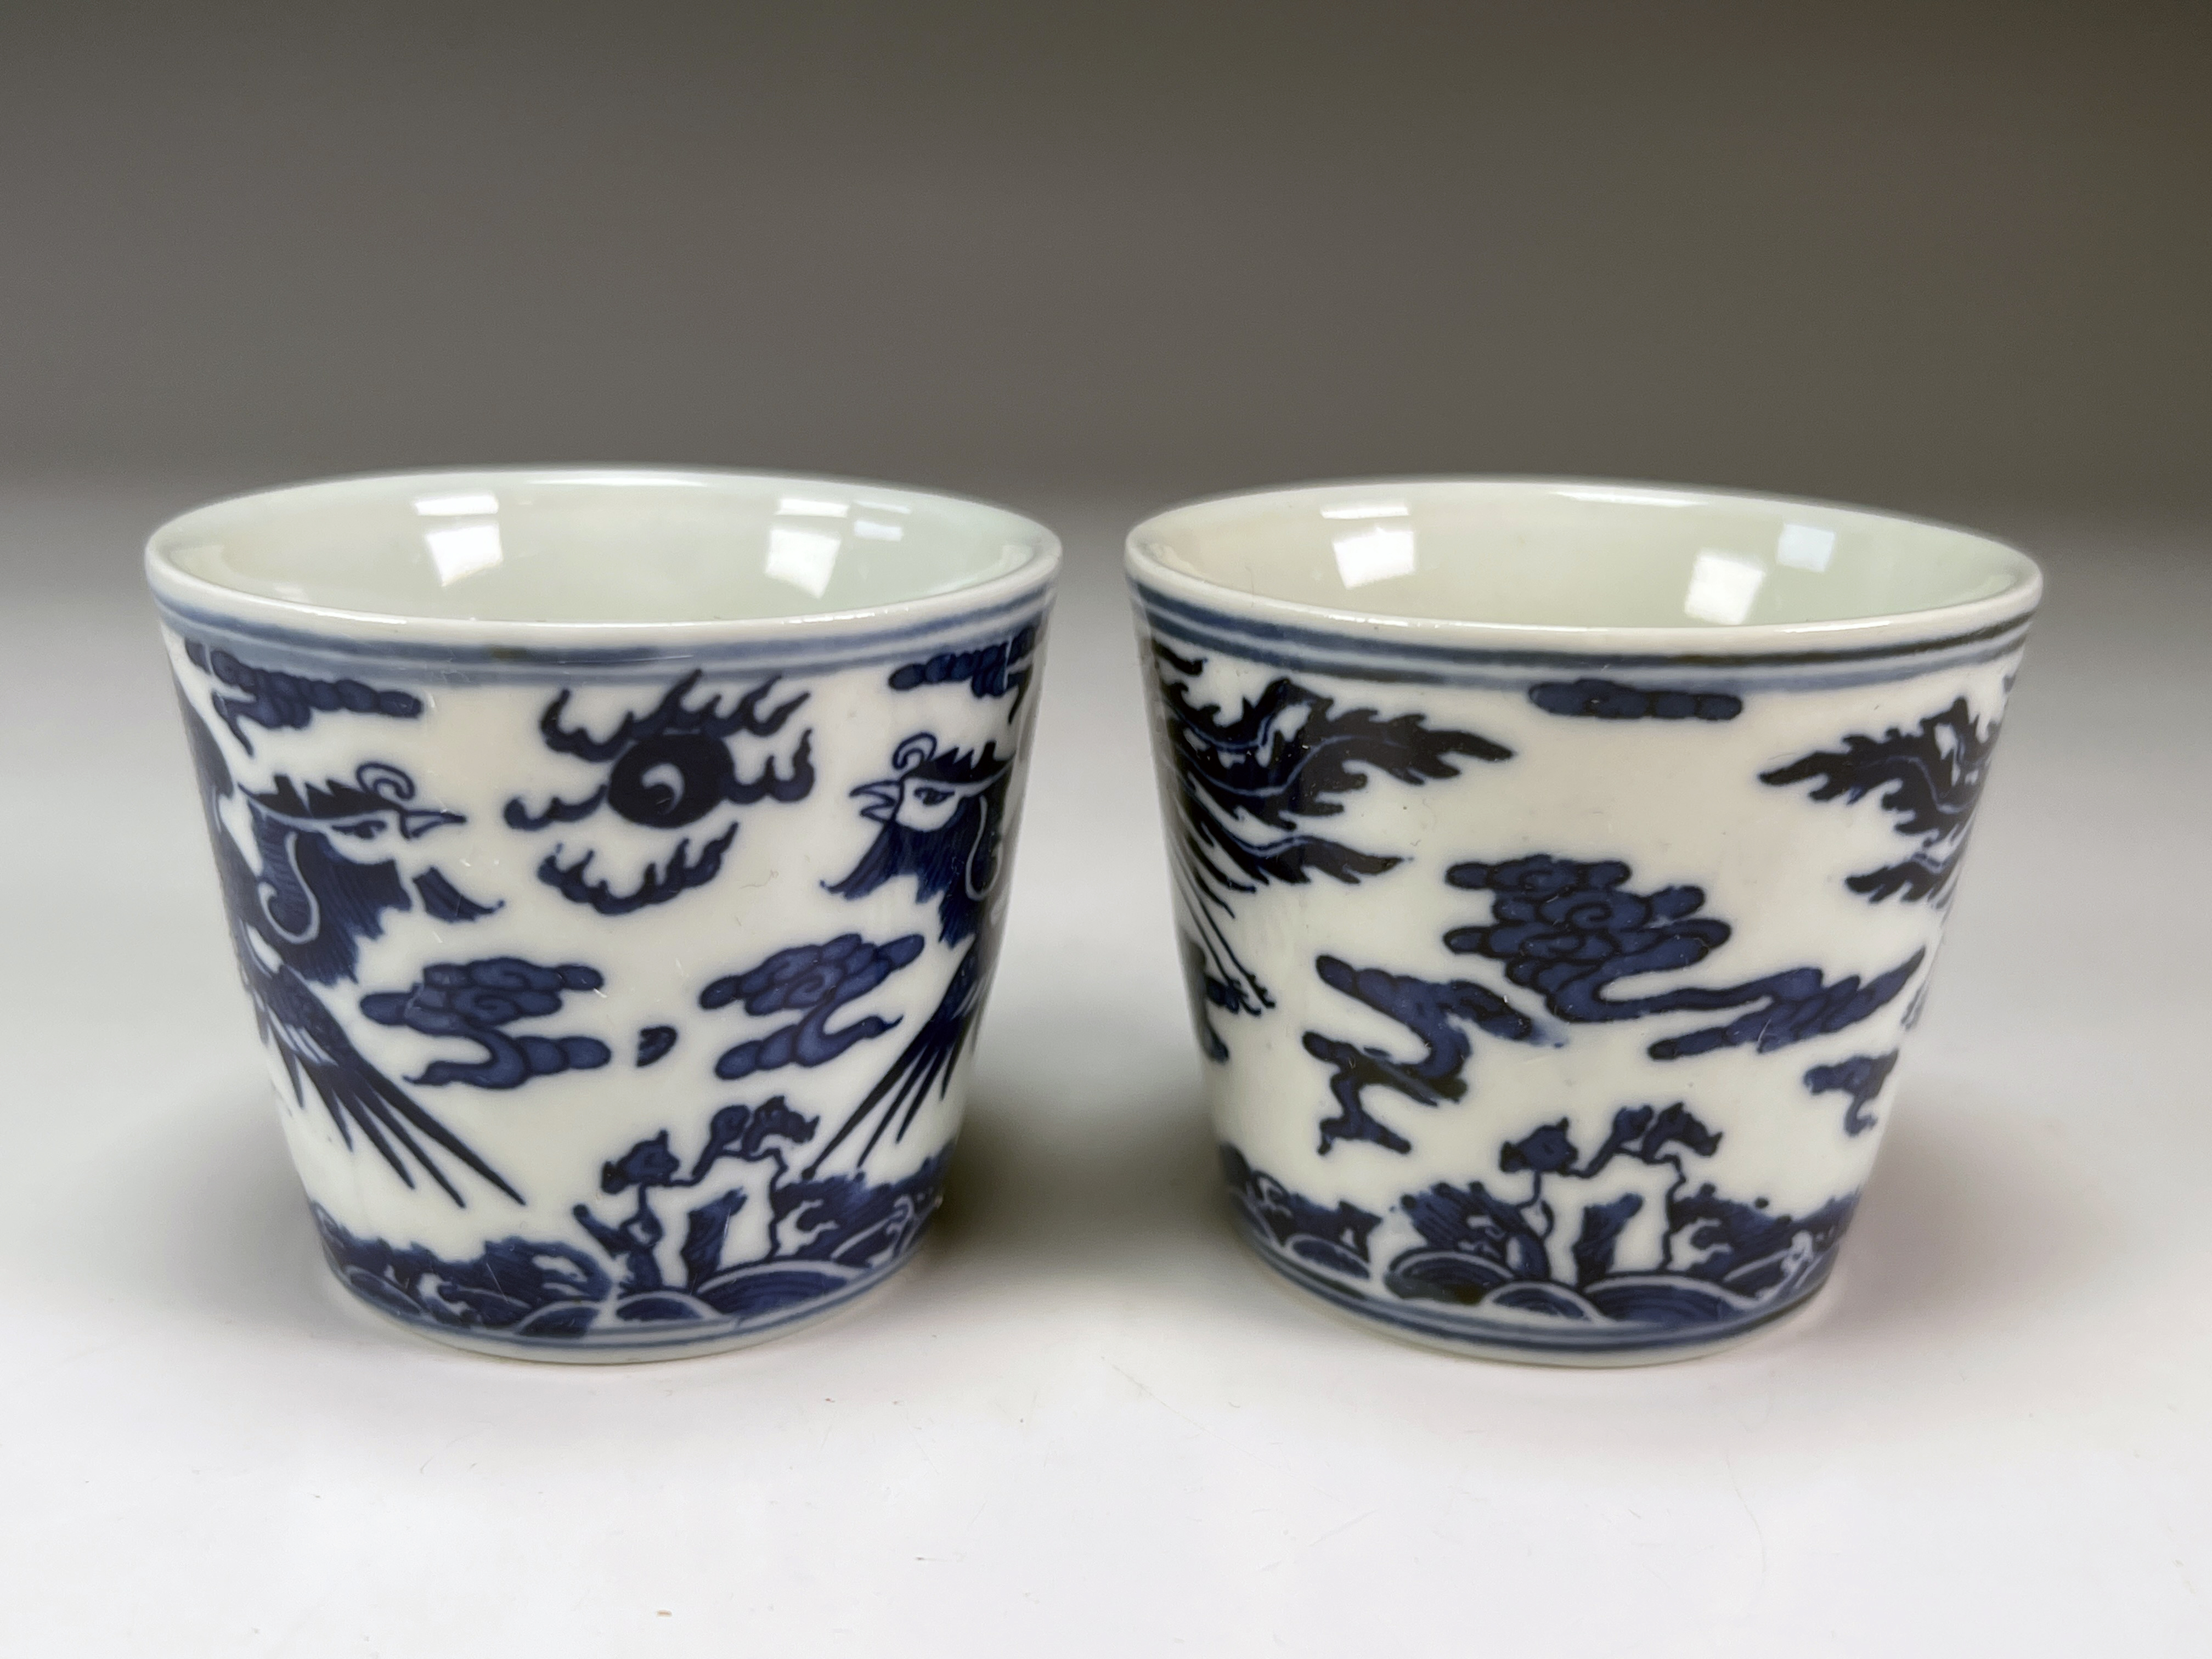 Charming Blue & White Phoenix Porcelain Tea Cups With Six Character Mark image 3